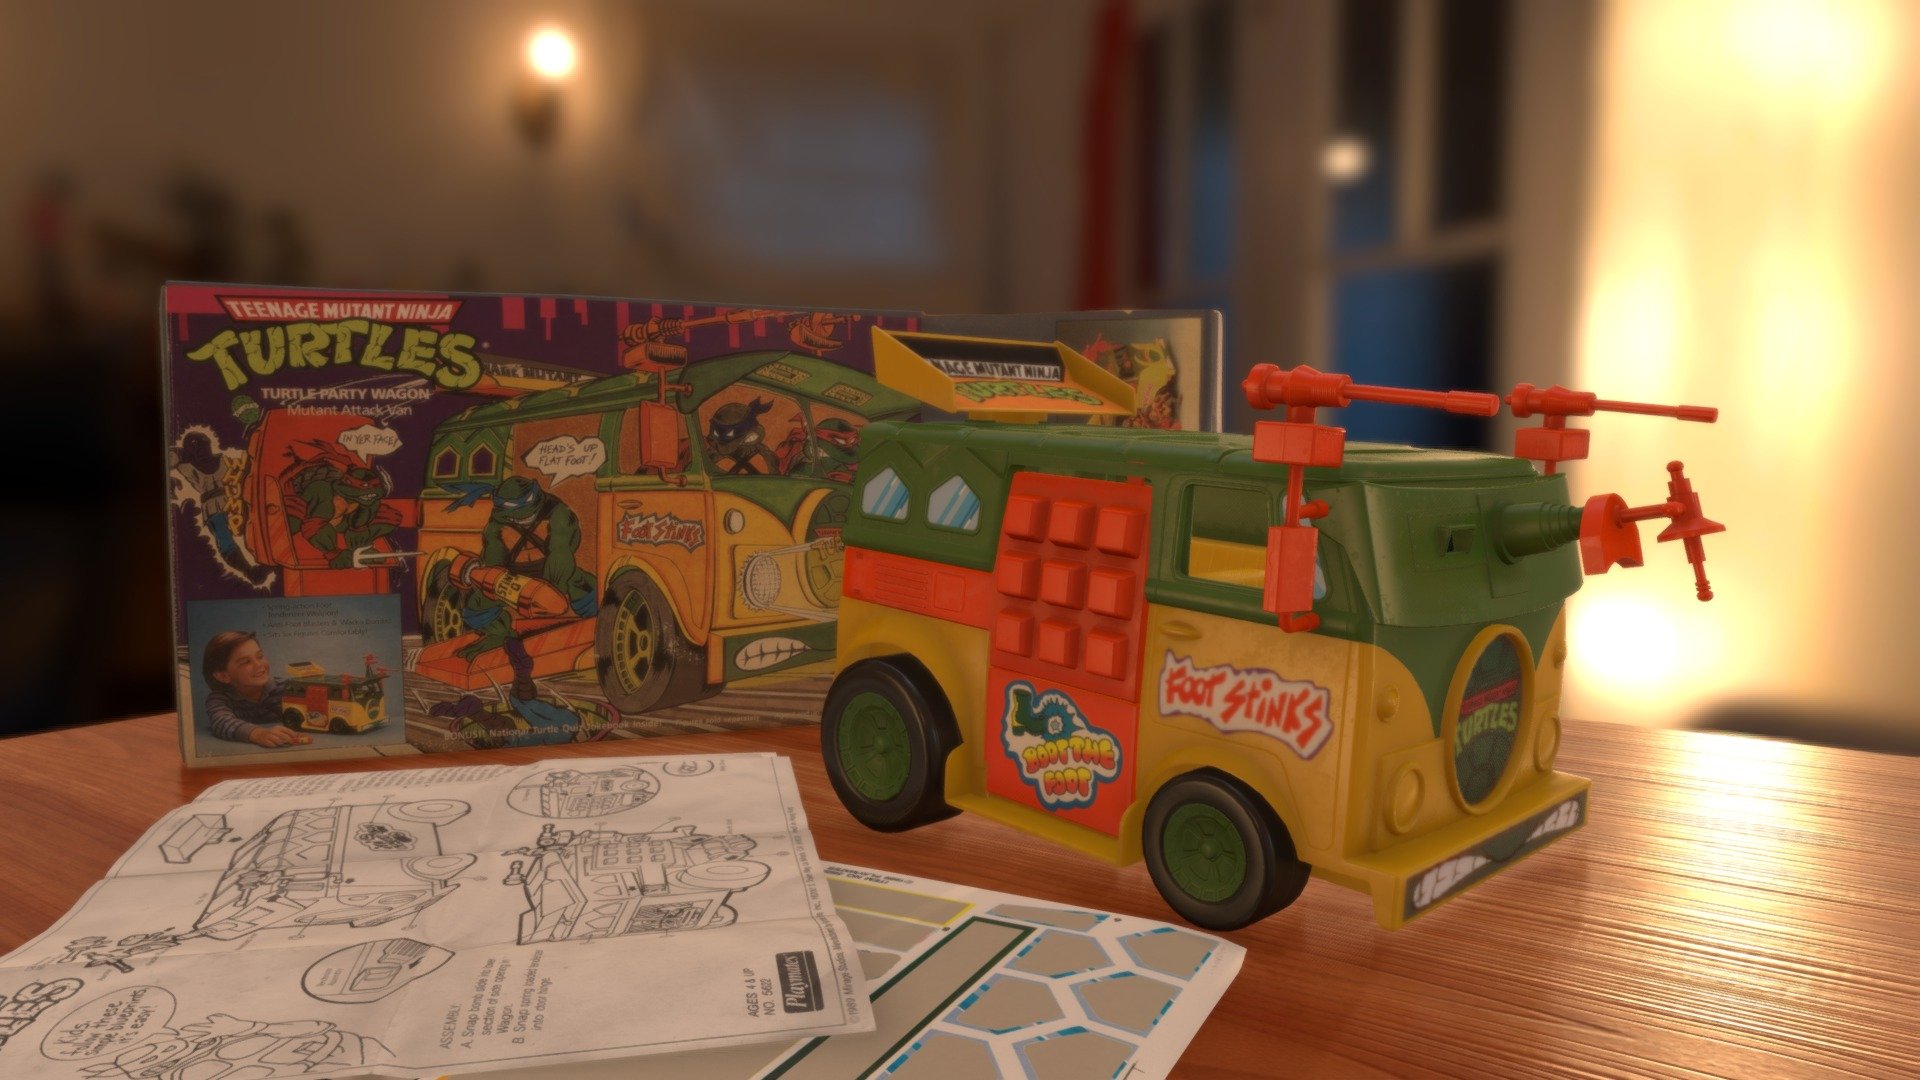 1998 TMNT Party Wagon Toy